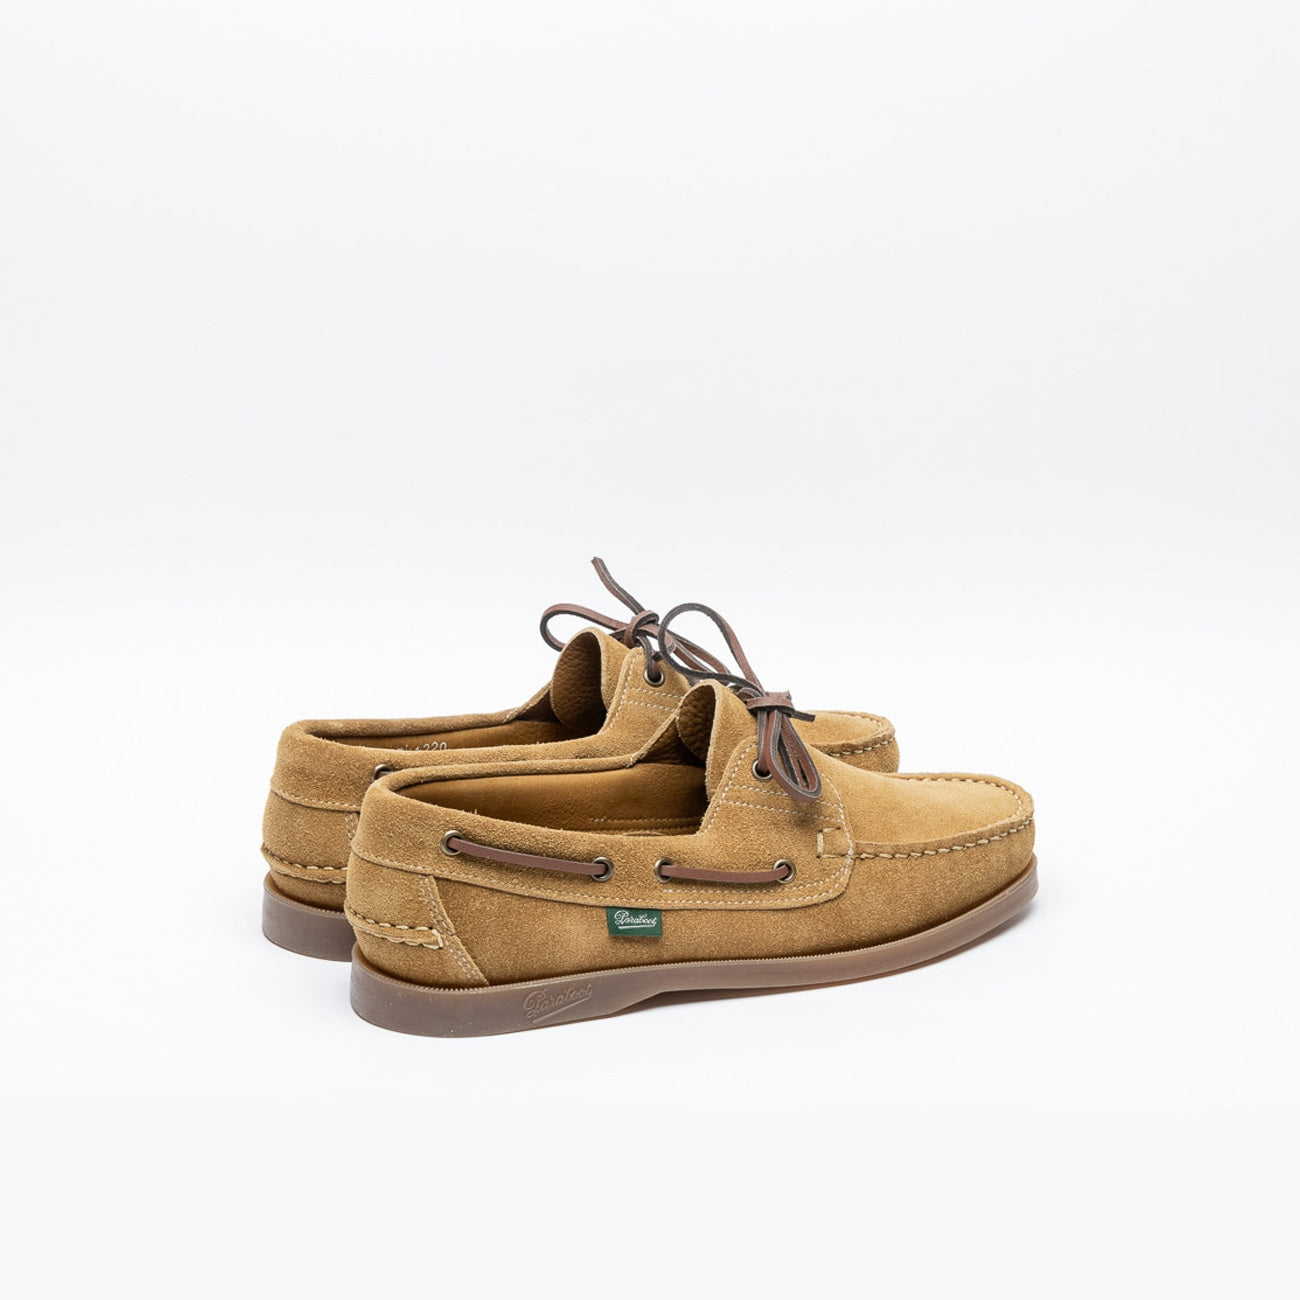 Paraboot Barth boat moccasin in tobacco suede